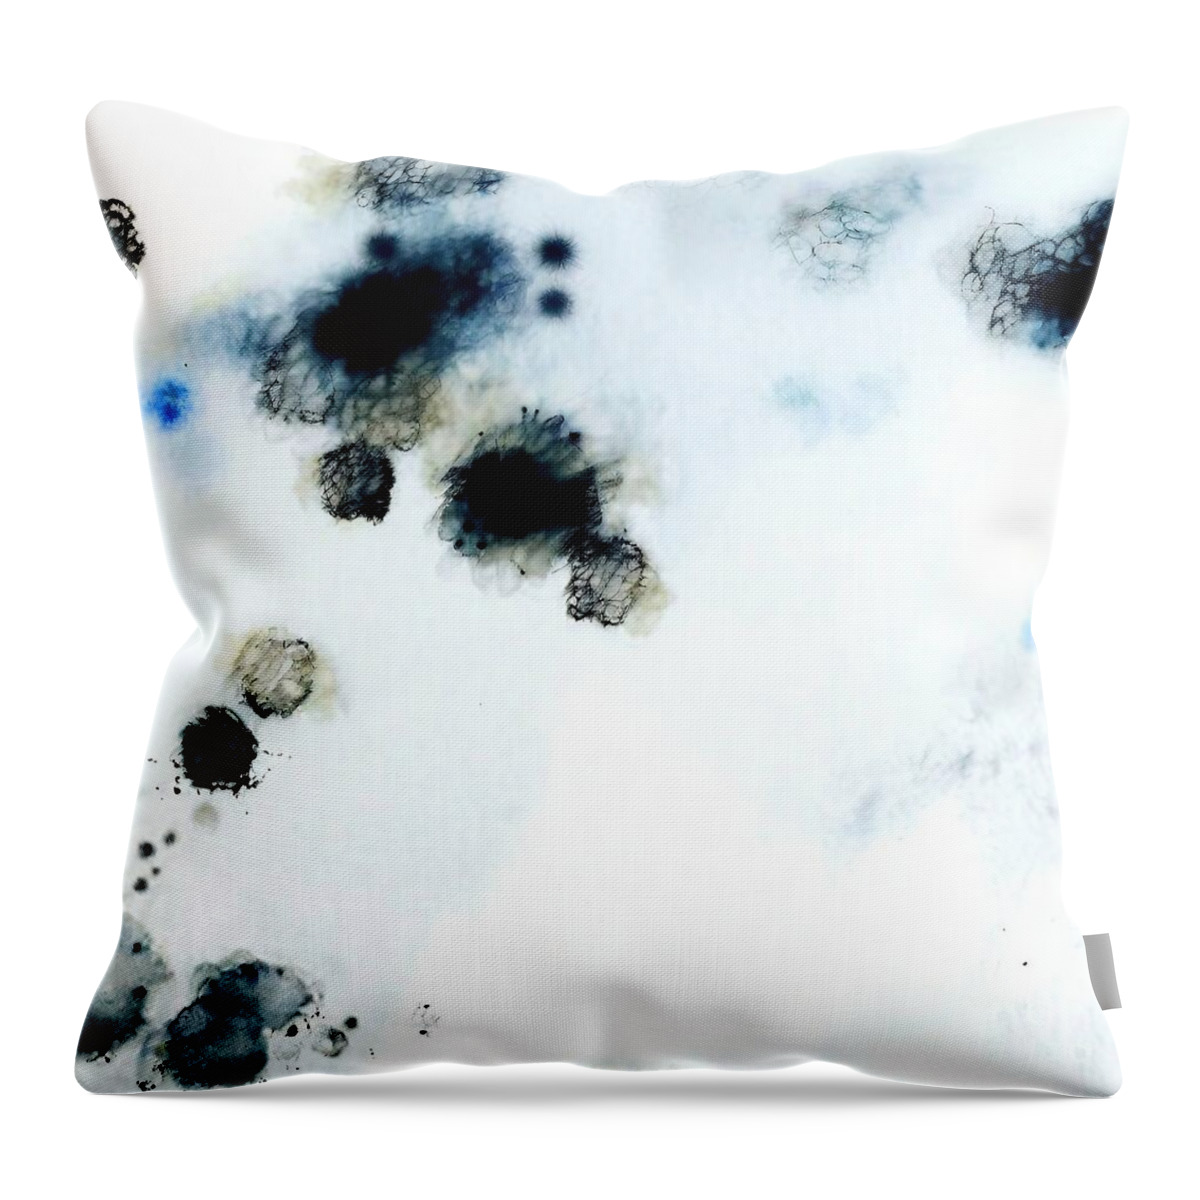  Throw Pillow featuring the painting Everything else disappears II Painting Liminality Oil Painting White Calm Green Abstract Landscape Blue Yellow Contemporary Beach abstract art artistic background black brush color creative by N Akkash